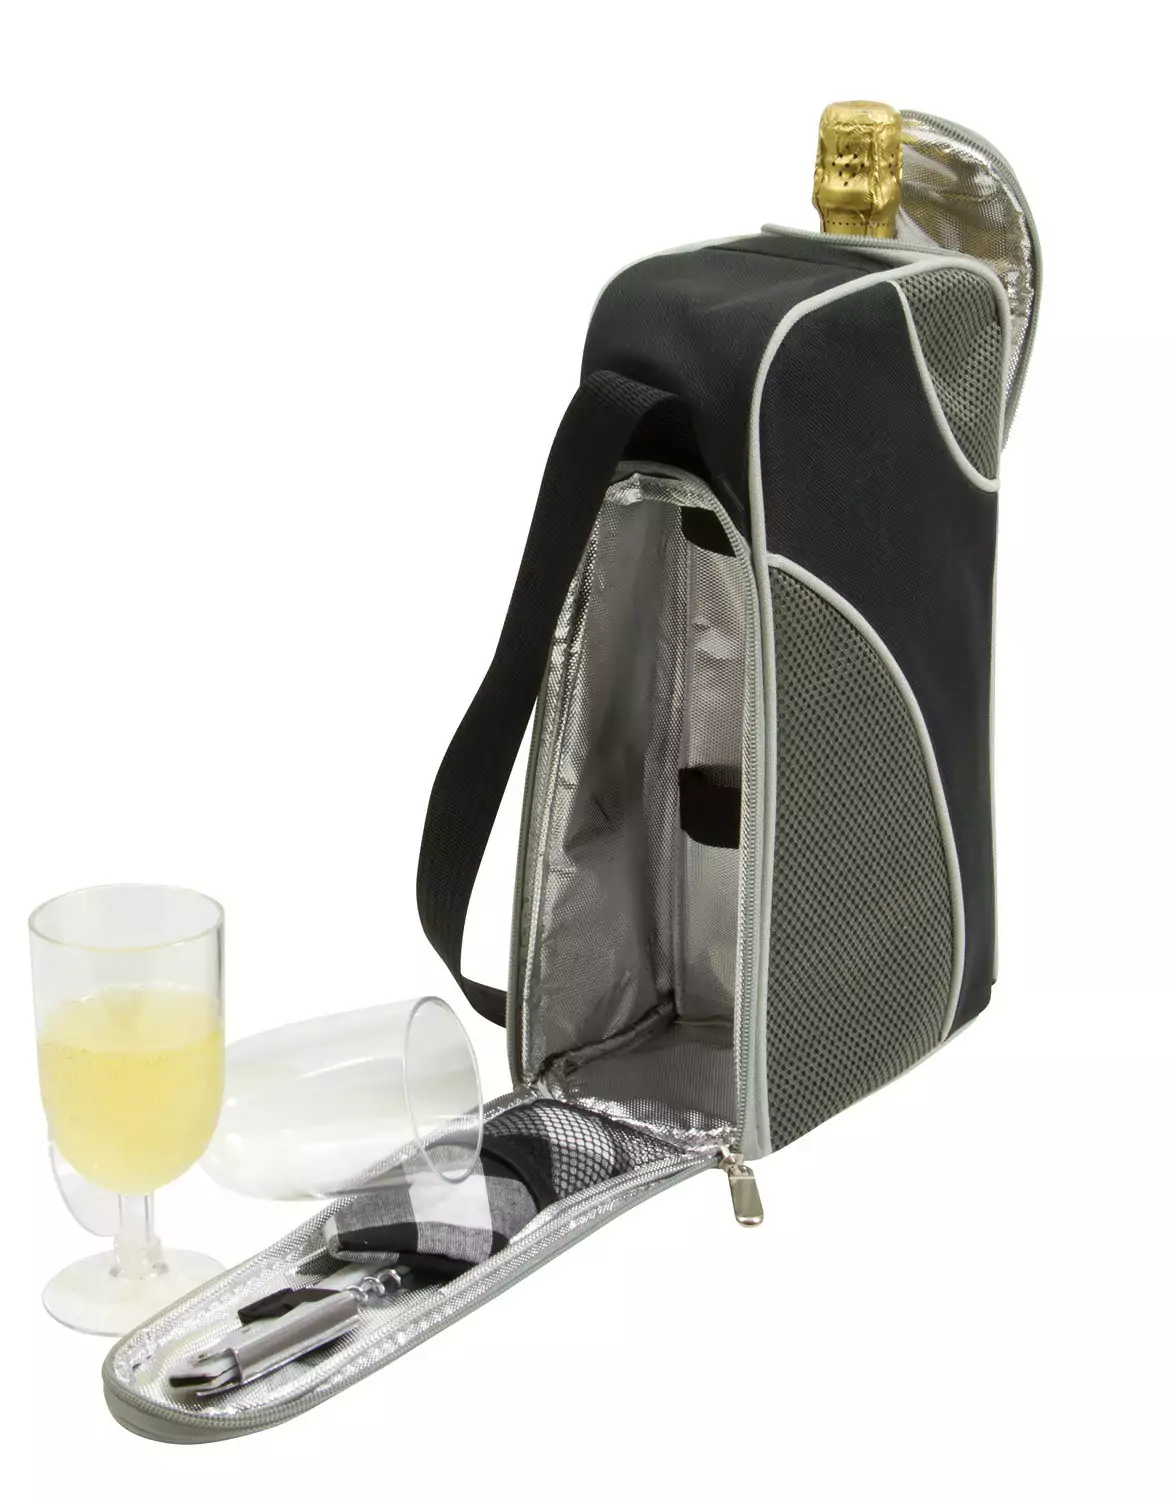 Wine Bag 2 Person With Wine Glasses , Napkins And Opener